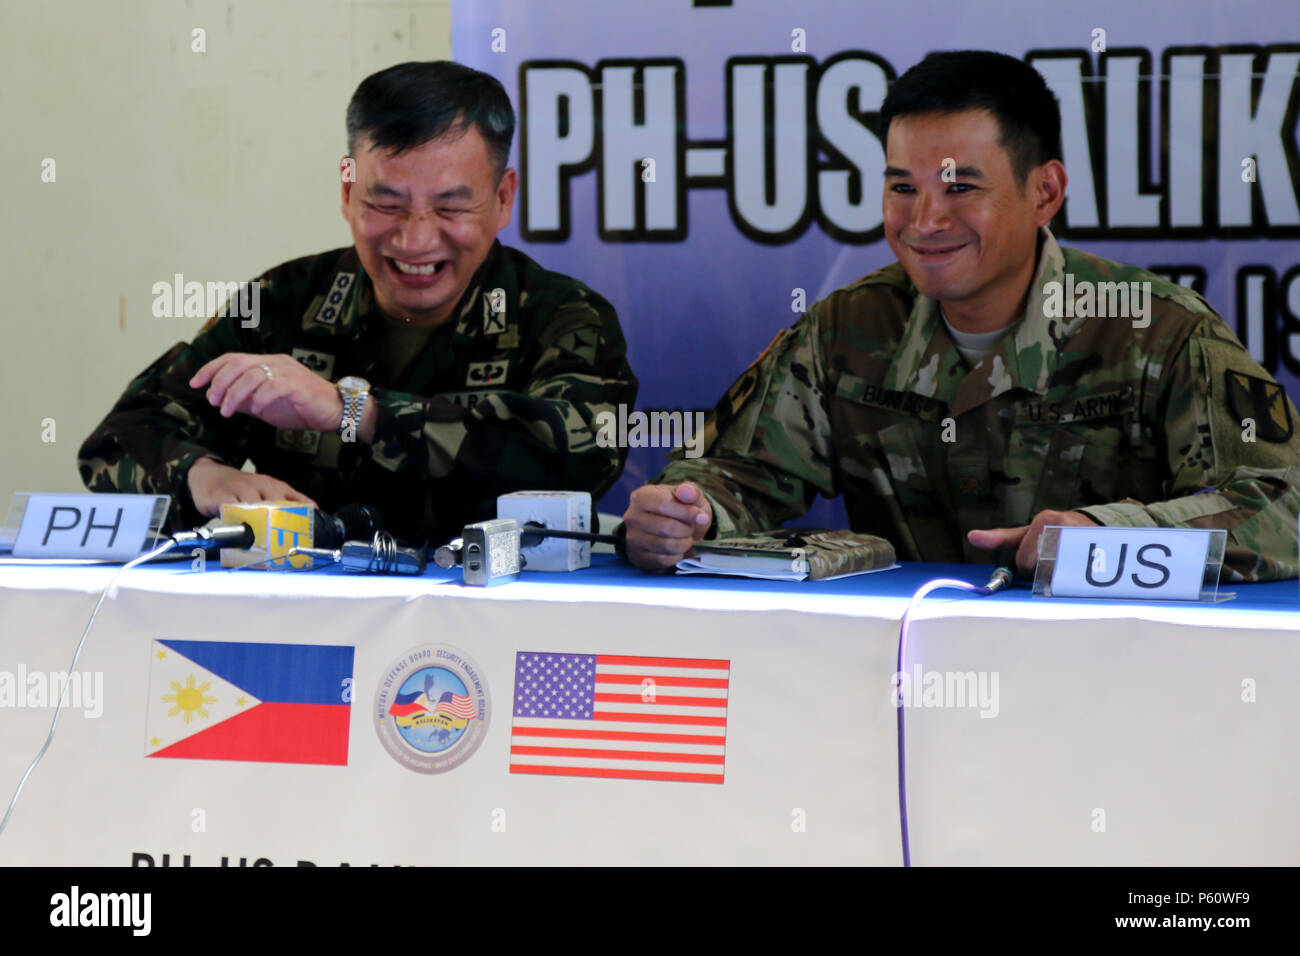 Colonel Roberto T. Ancan, chief of staff, 3rd Infantry Division, Armed Forces of the Philippines (AFP), left, and Maj. Alejandro L. Buniag, 303rd Maneuver Enhancement Brigade, 9th Mission Support Command, Combined Joint Civil Military Operation Task Force commander laugh together before the start of a press conference following the opening ceremony of Exercise Balikatan 2016 at Camp Peralta, Panay, Philippines, April 4, 2016. The ceremony signified the official start of the annual bilateral exercise that will run from 4-16 April. In Panay, Balikatan 2016 will consist of medical, dental, veteri Stock Photo